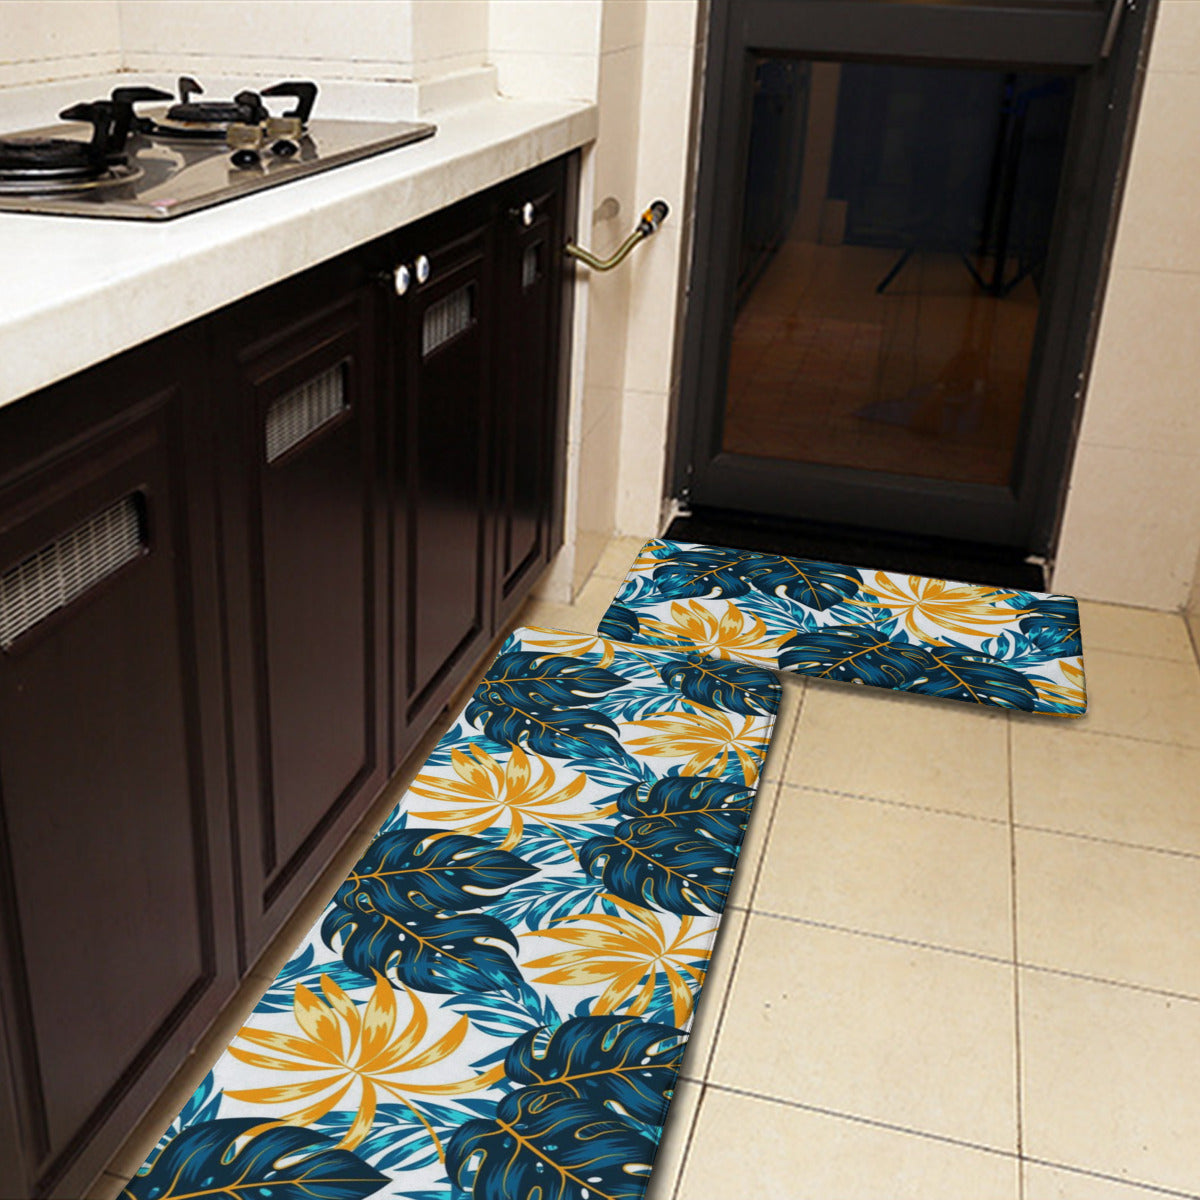 Kitchen mats leaves decoration Home-clothes-jewelry